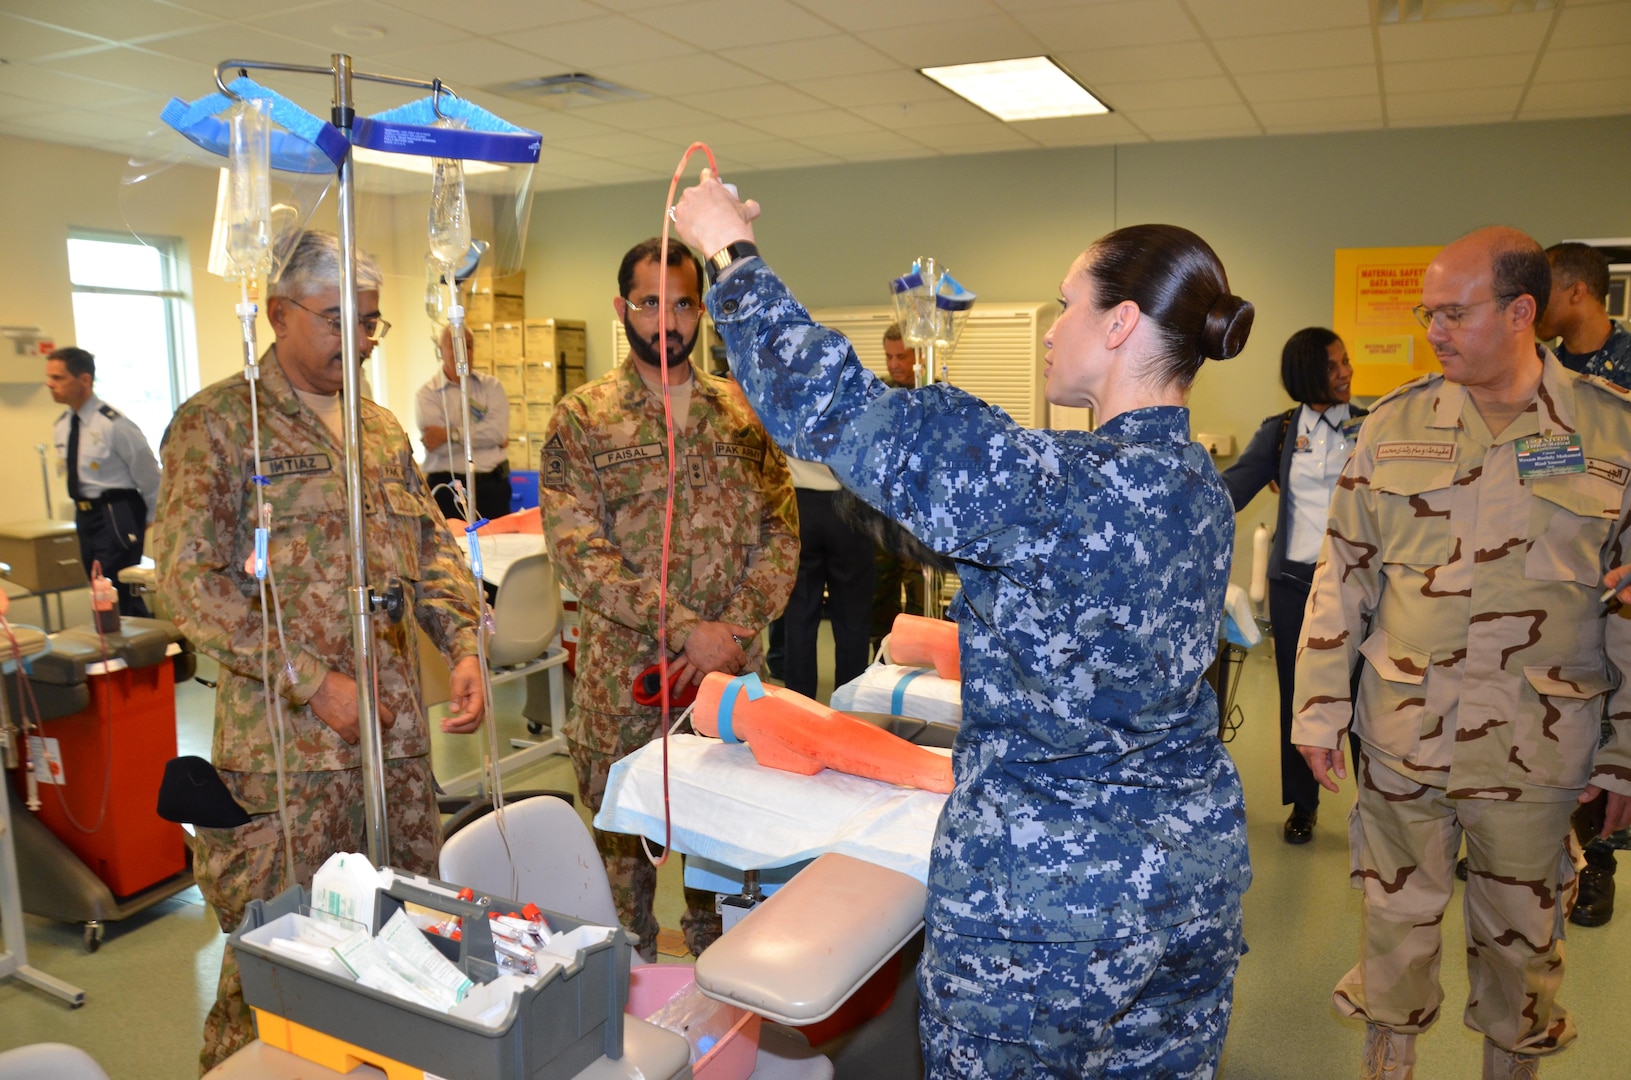 Participants in the CENTCOM Theater Medical Conference tour the “dead stick lab”, which is a laboratory used in the Basic Medical Technician Corpsman Program, where students practice intravenous (IV) and venipuncture skills on simulated arms. Medical professionals representing more than 10 countries within the US Central Command area of operation, Europe, and the U.S. attended the conference to aid in the continued development of capabilities that will serve to improve regional interoperability and cooperation. (Medical Education and Training Campus Public Affairs photo by Lisa Braun/Released)